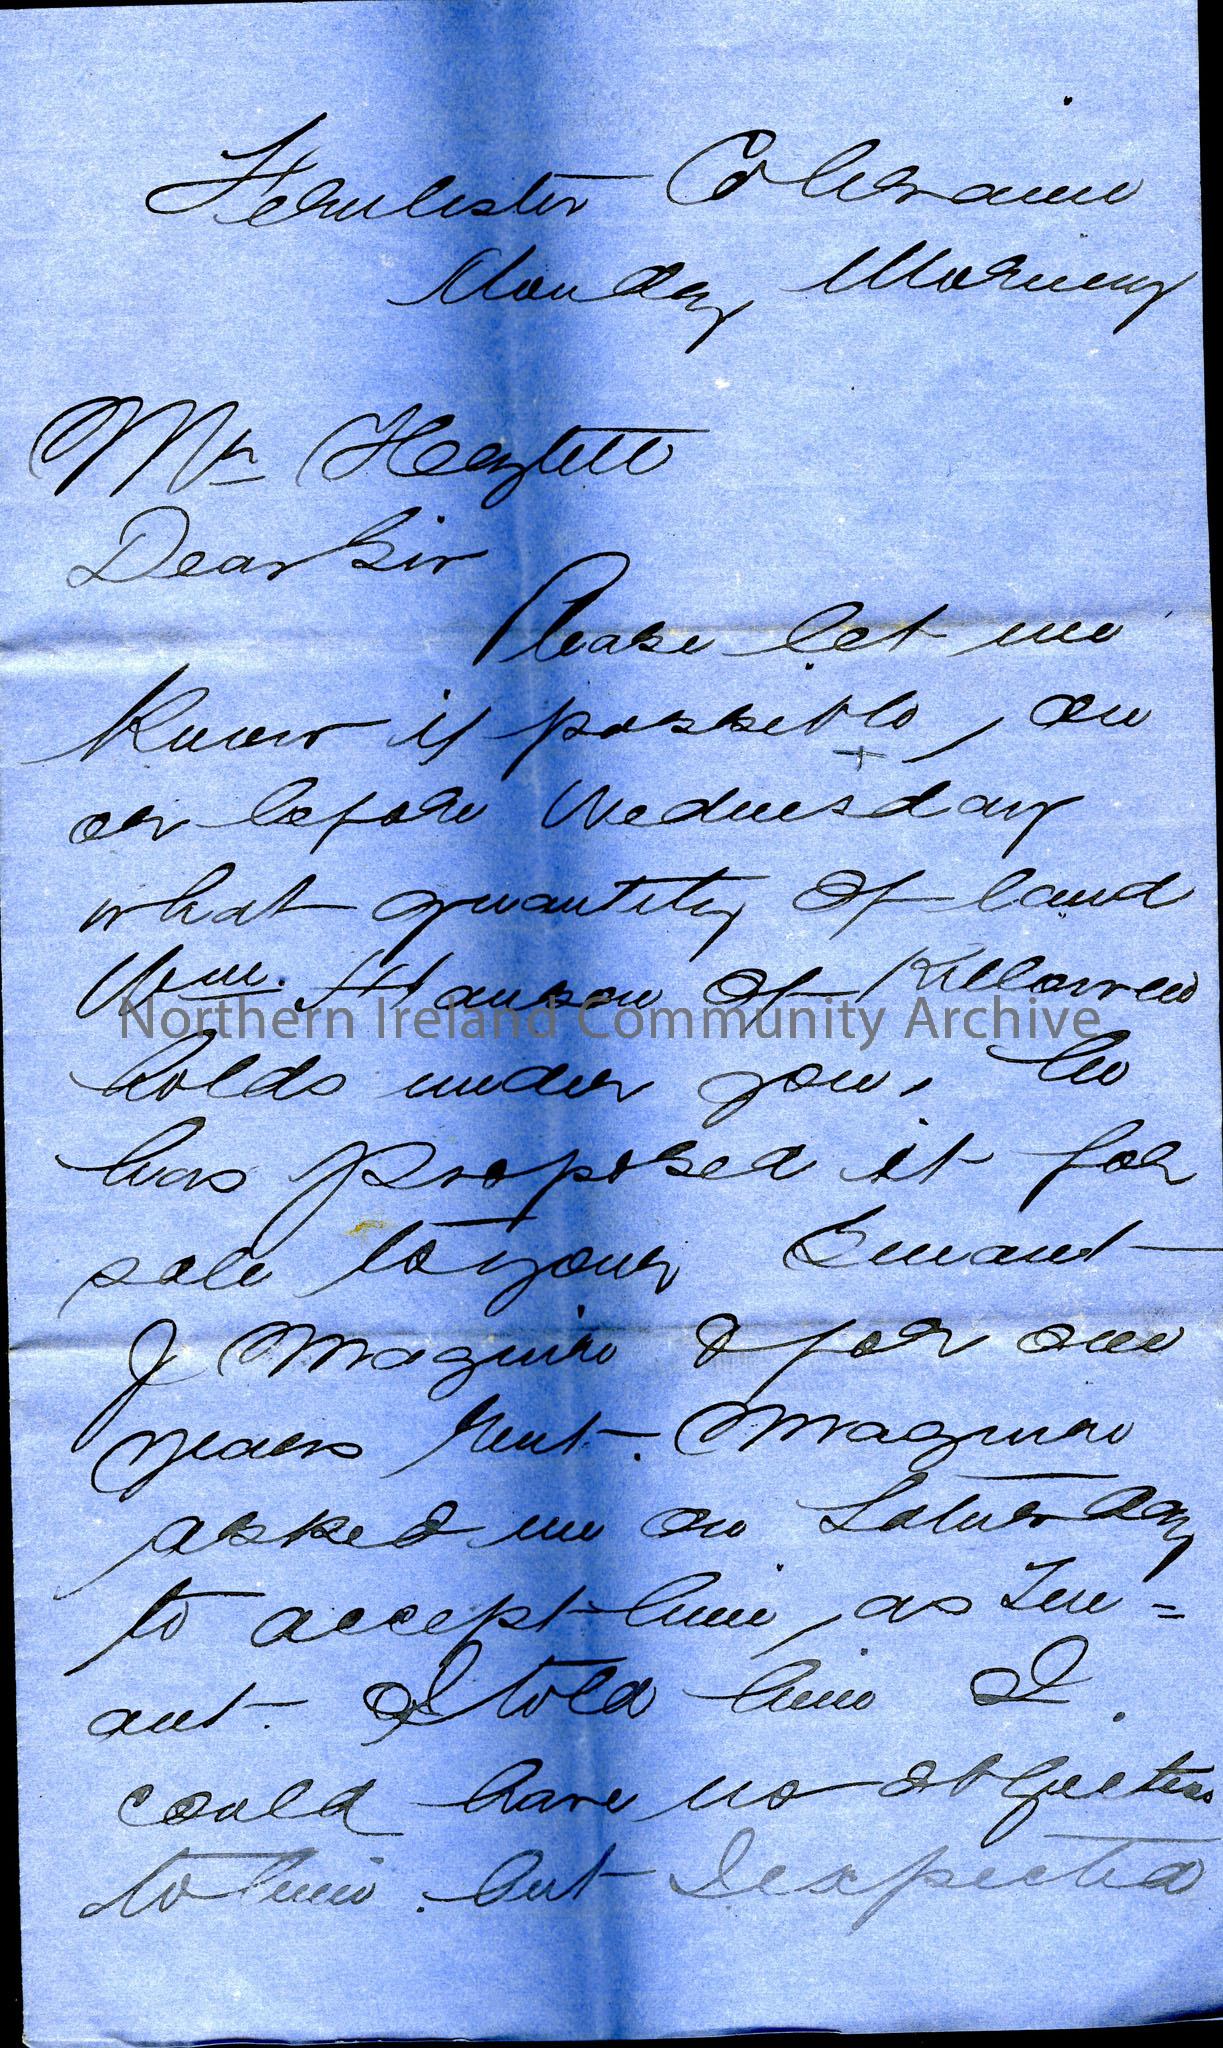 Handwritten letter from ‘Rankin’ ‘Coleraine’ to ‘Robert Hezlet Esq, Bovagh House’. Date unknown. Letter is discussing the buying and selling of land. …